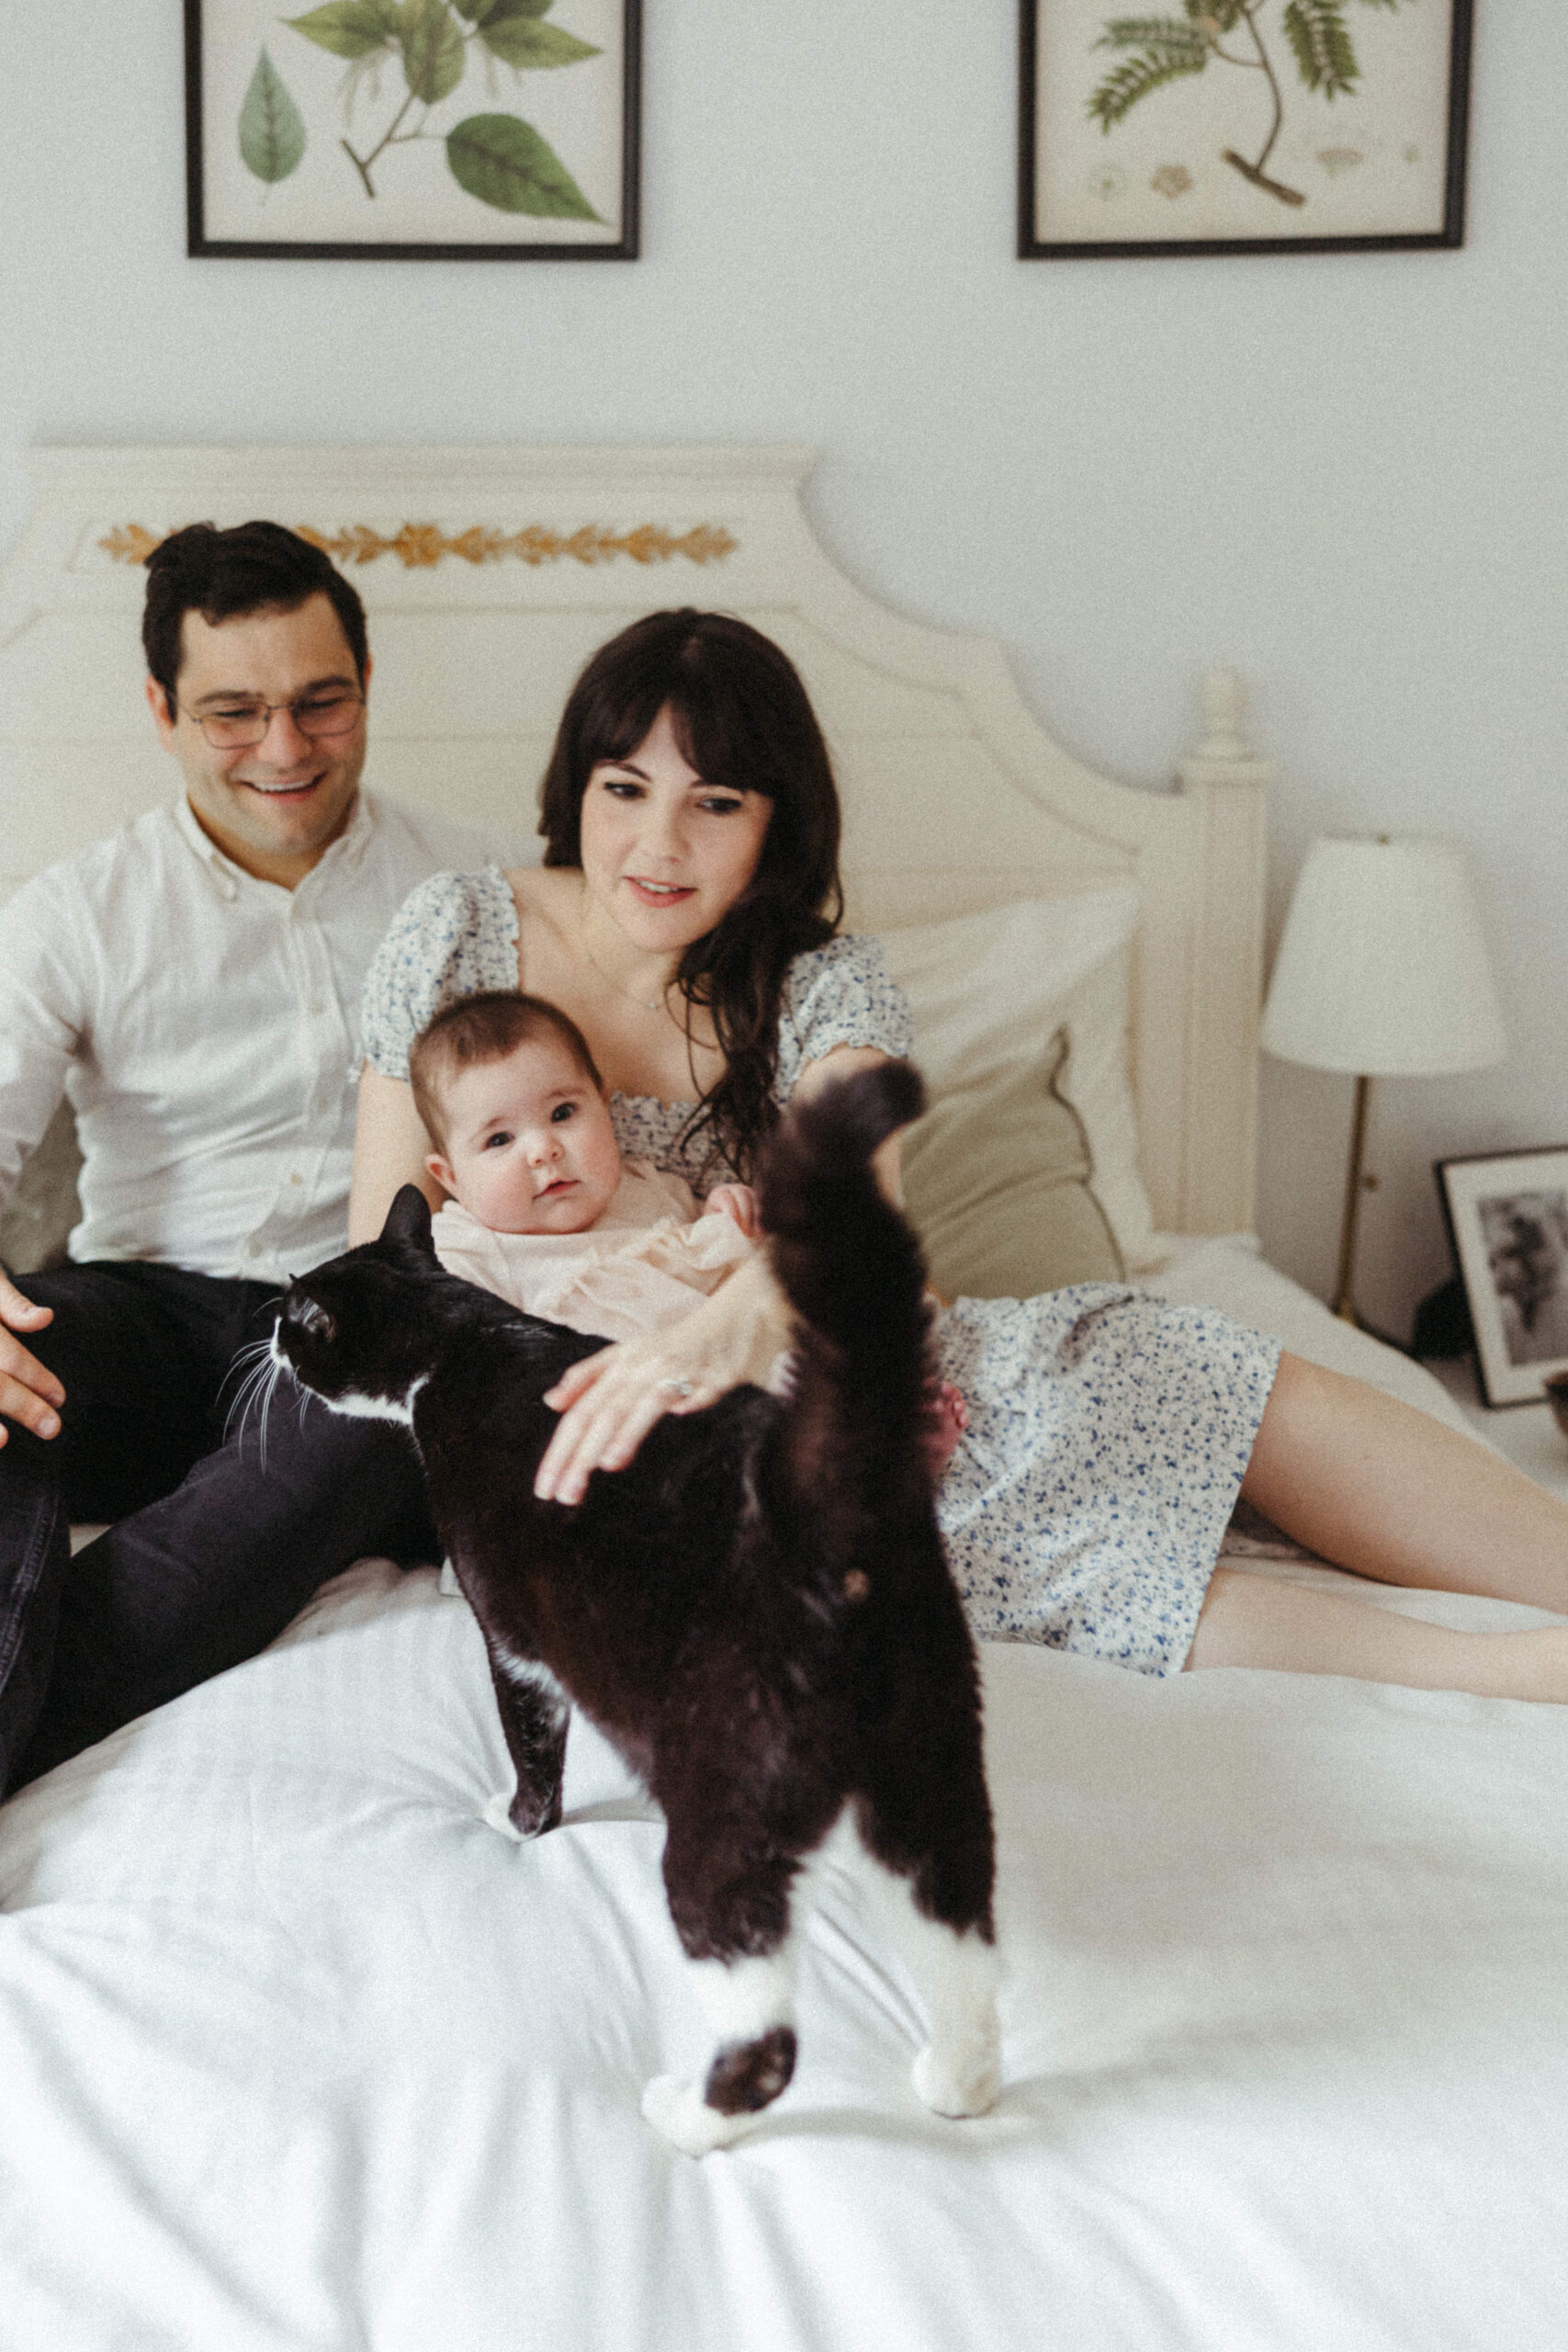 A family share a moment together with their infant and black and white cat during a candid in home family photo shoot